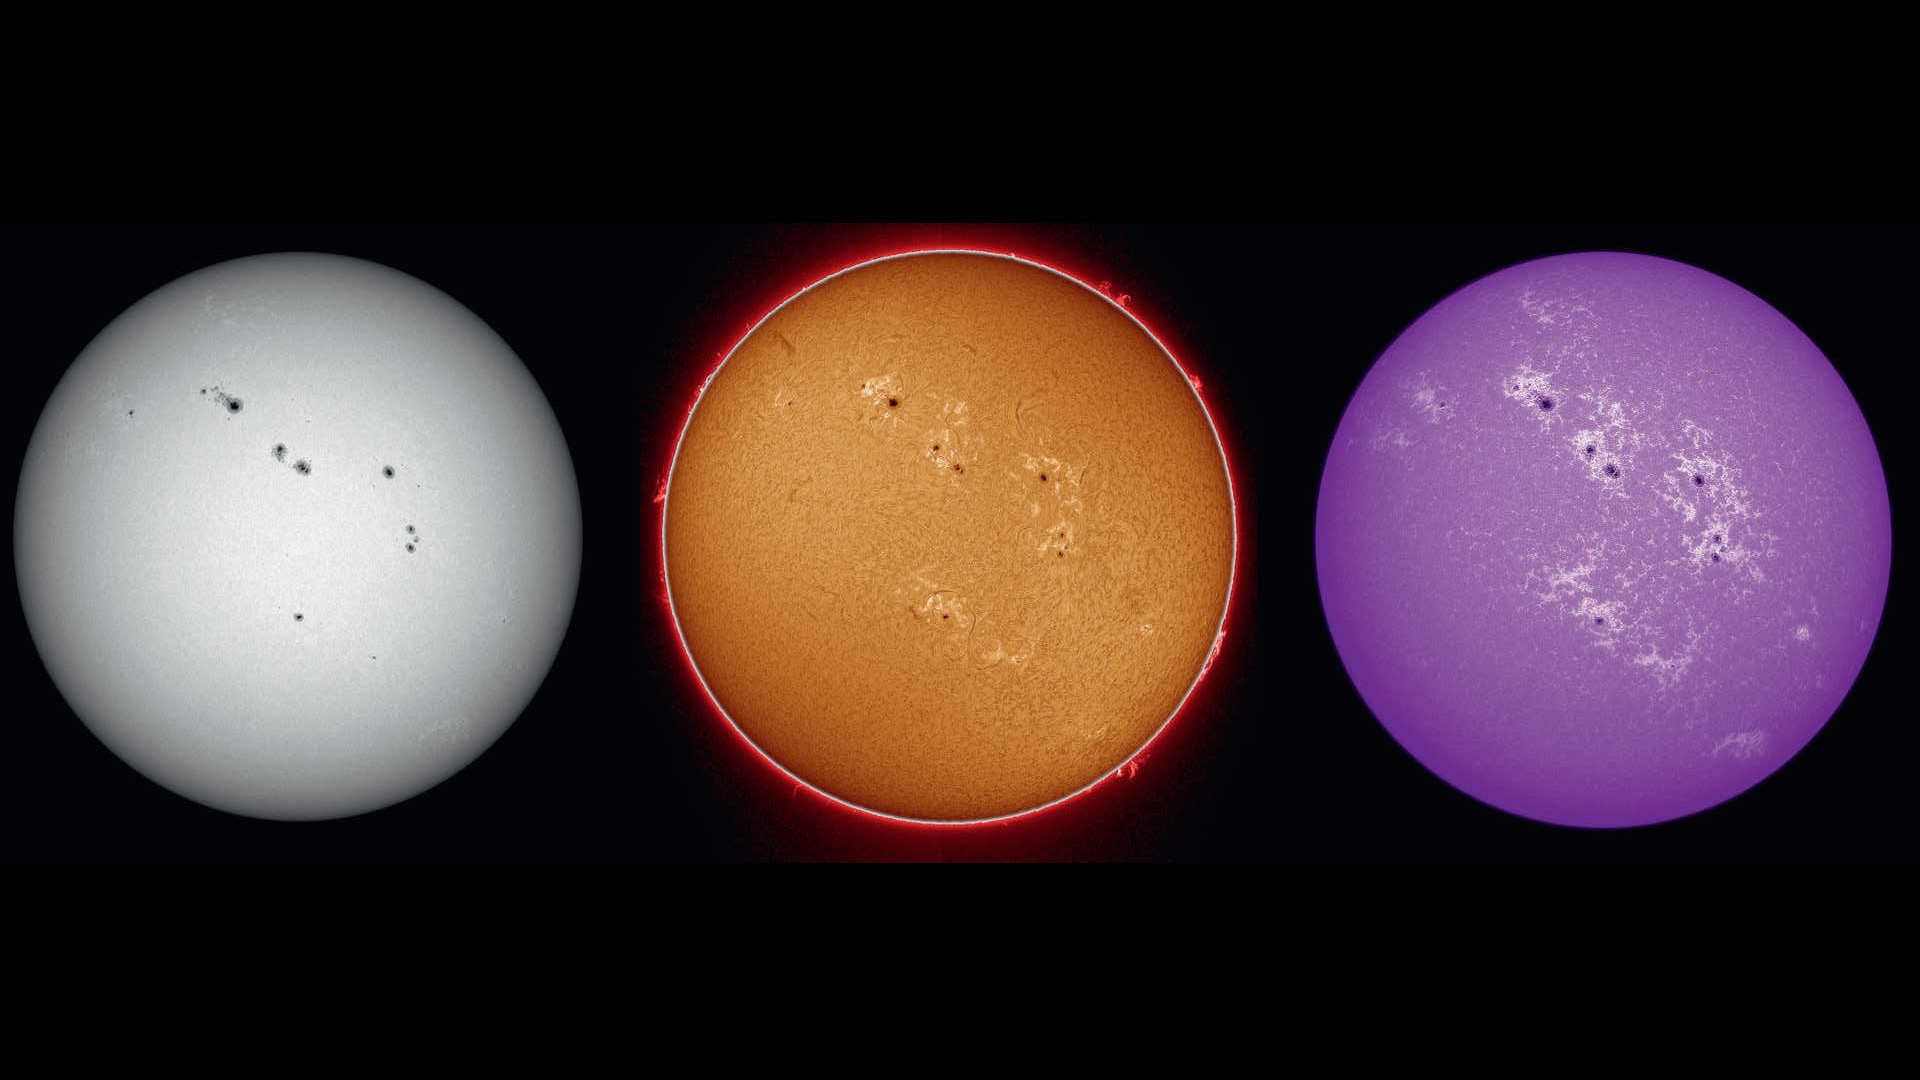 Views of the Sun in white light, in Hα light and in Ca-K light. An uncooled CCD camera together with a short focal length telescope with a 60mm aperture and 600mm focal length was used to create these images using a foil filter, a Hα filter and a Ca-K filter. Combination of composite images, each created from 500 images from a 2,500 image capture sequence. U. Dittler